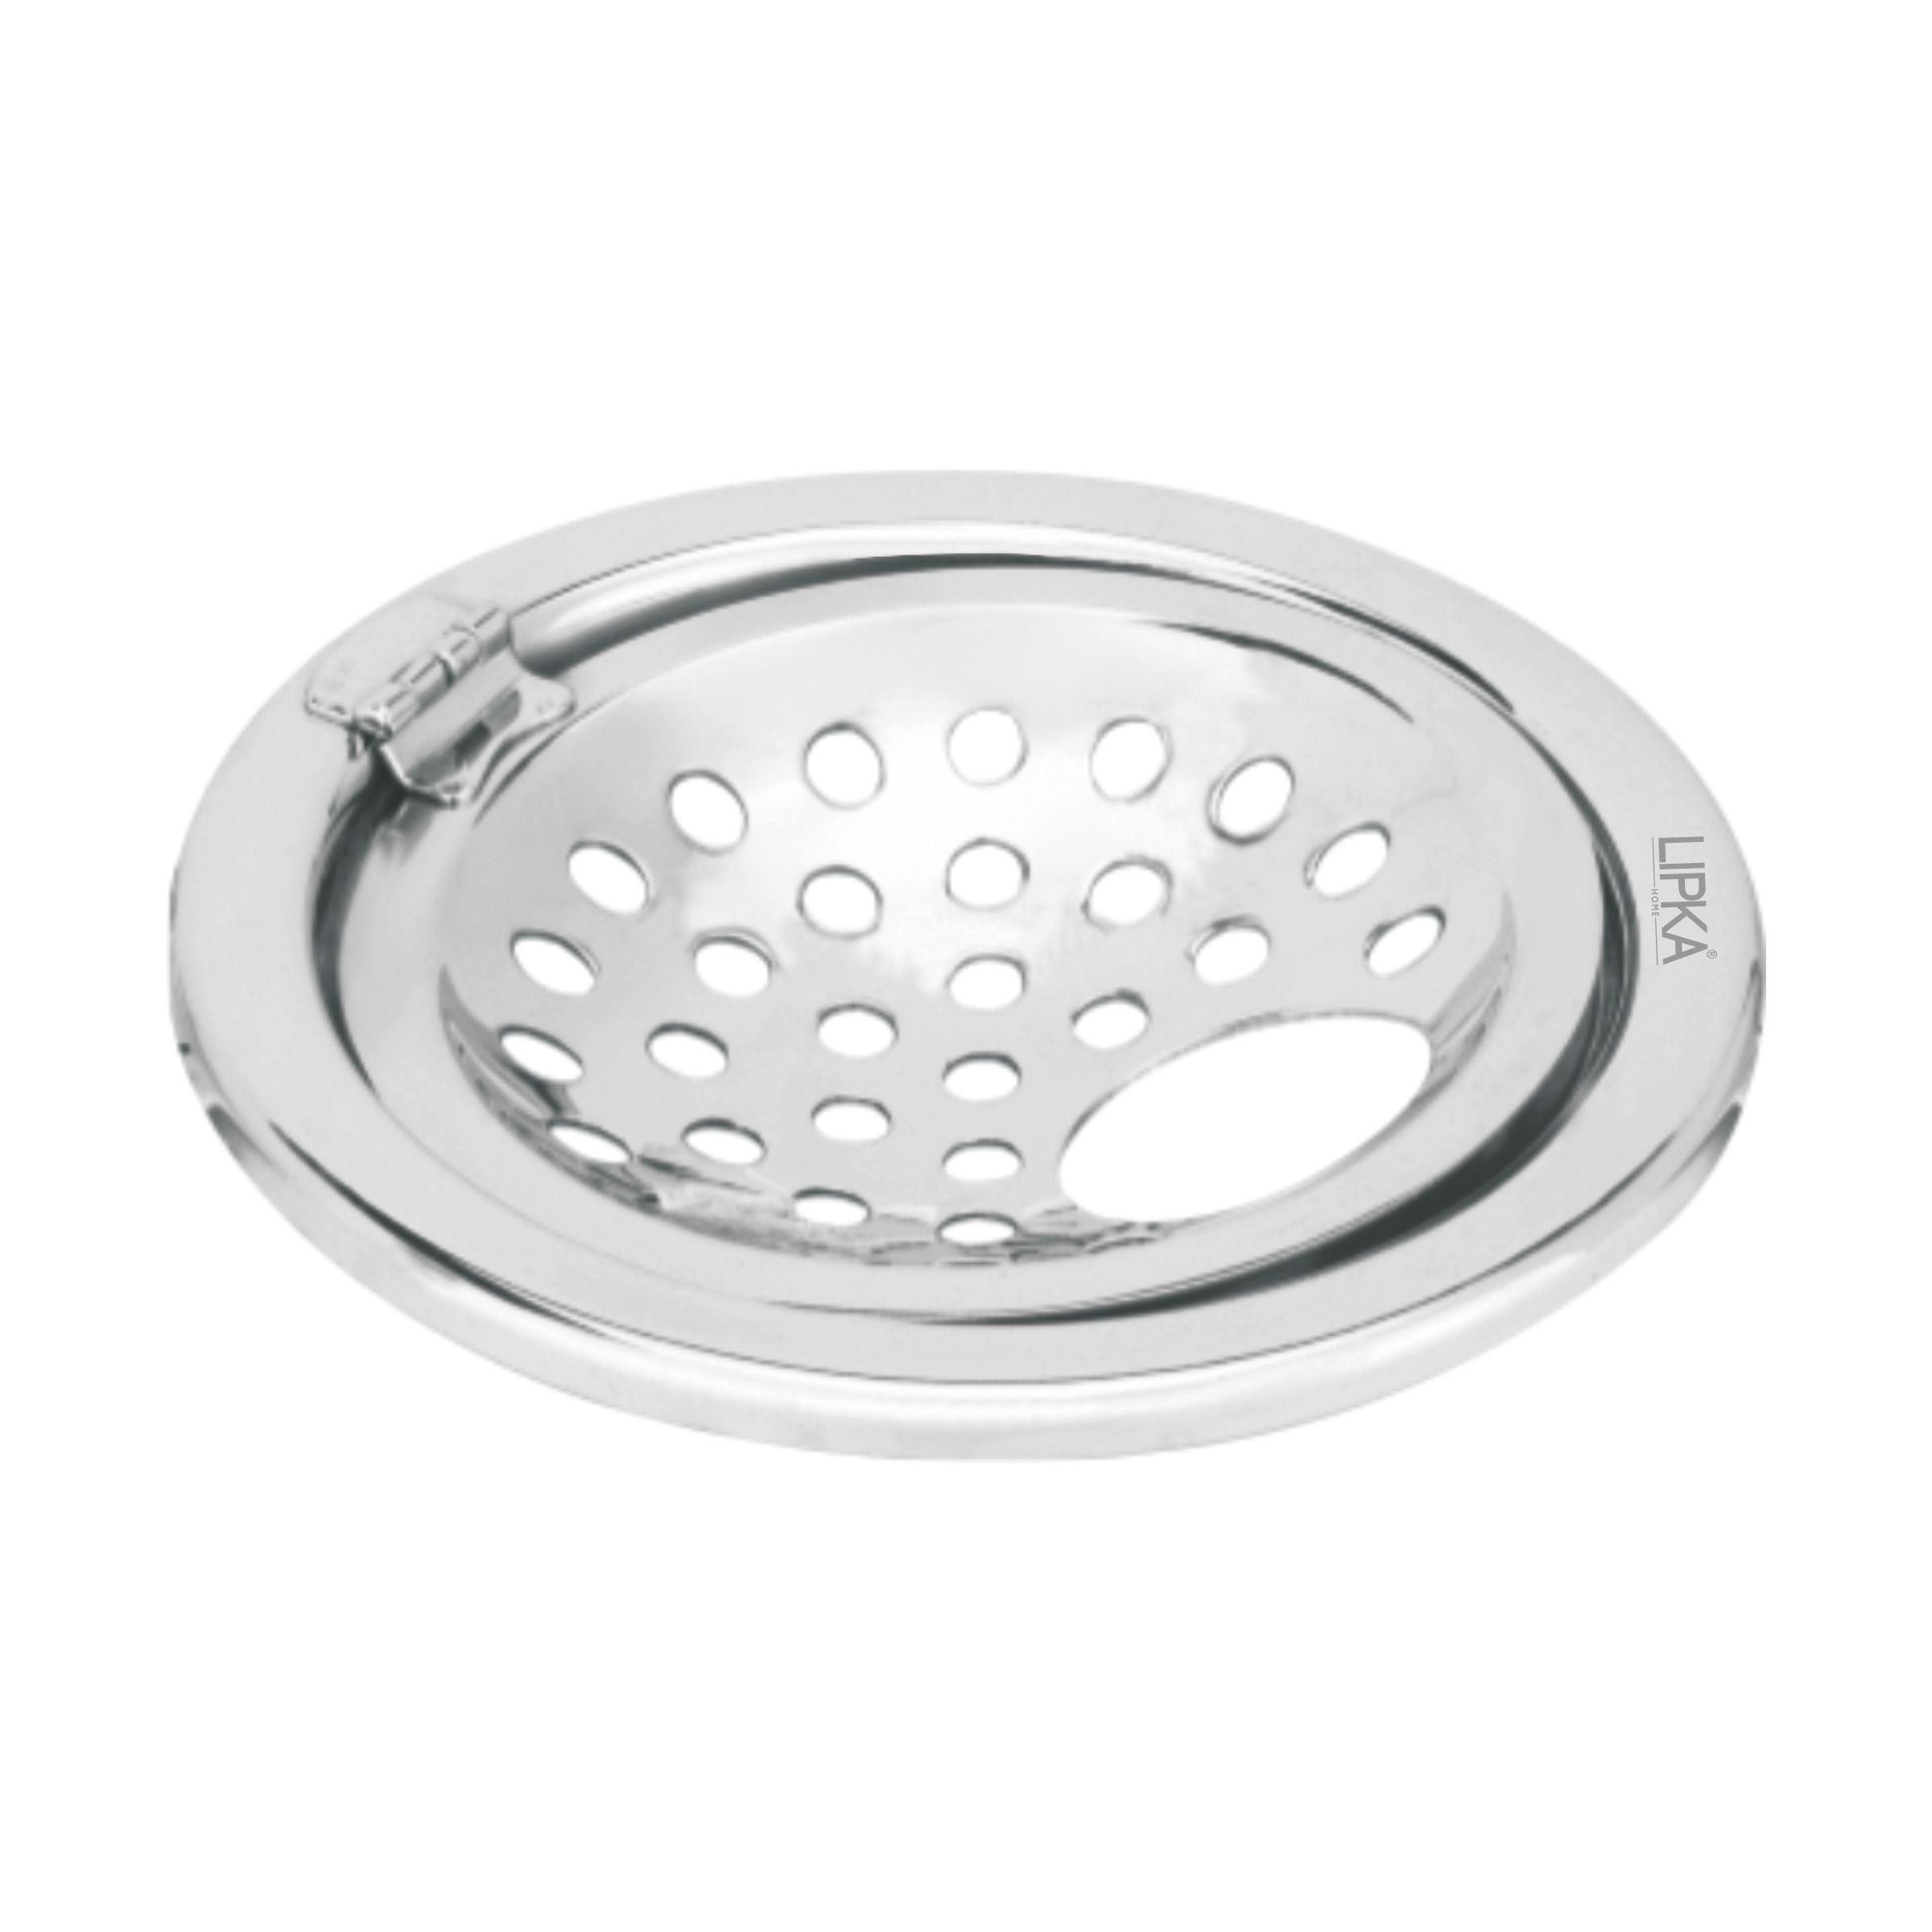 Eon Round Floor Drain with Hinge & Hole (5 inches)